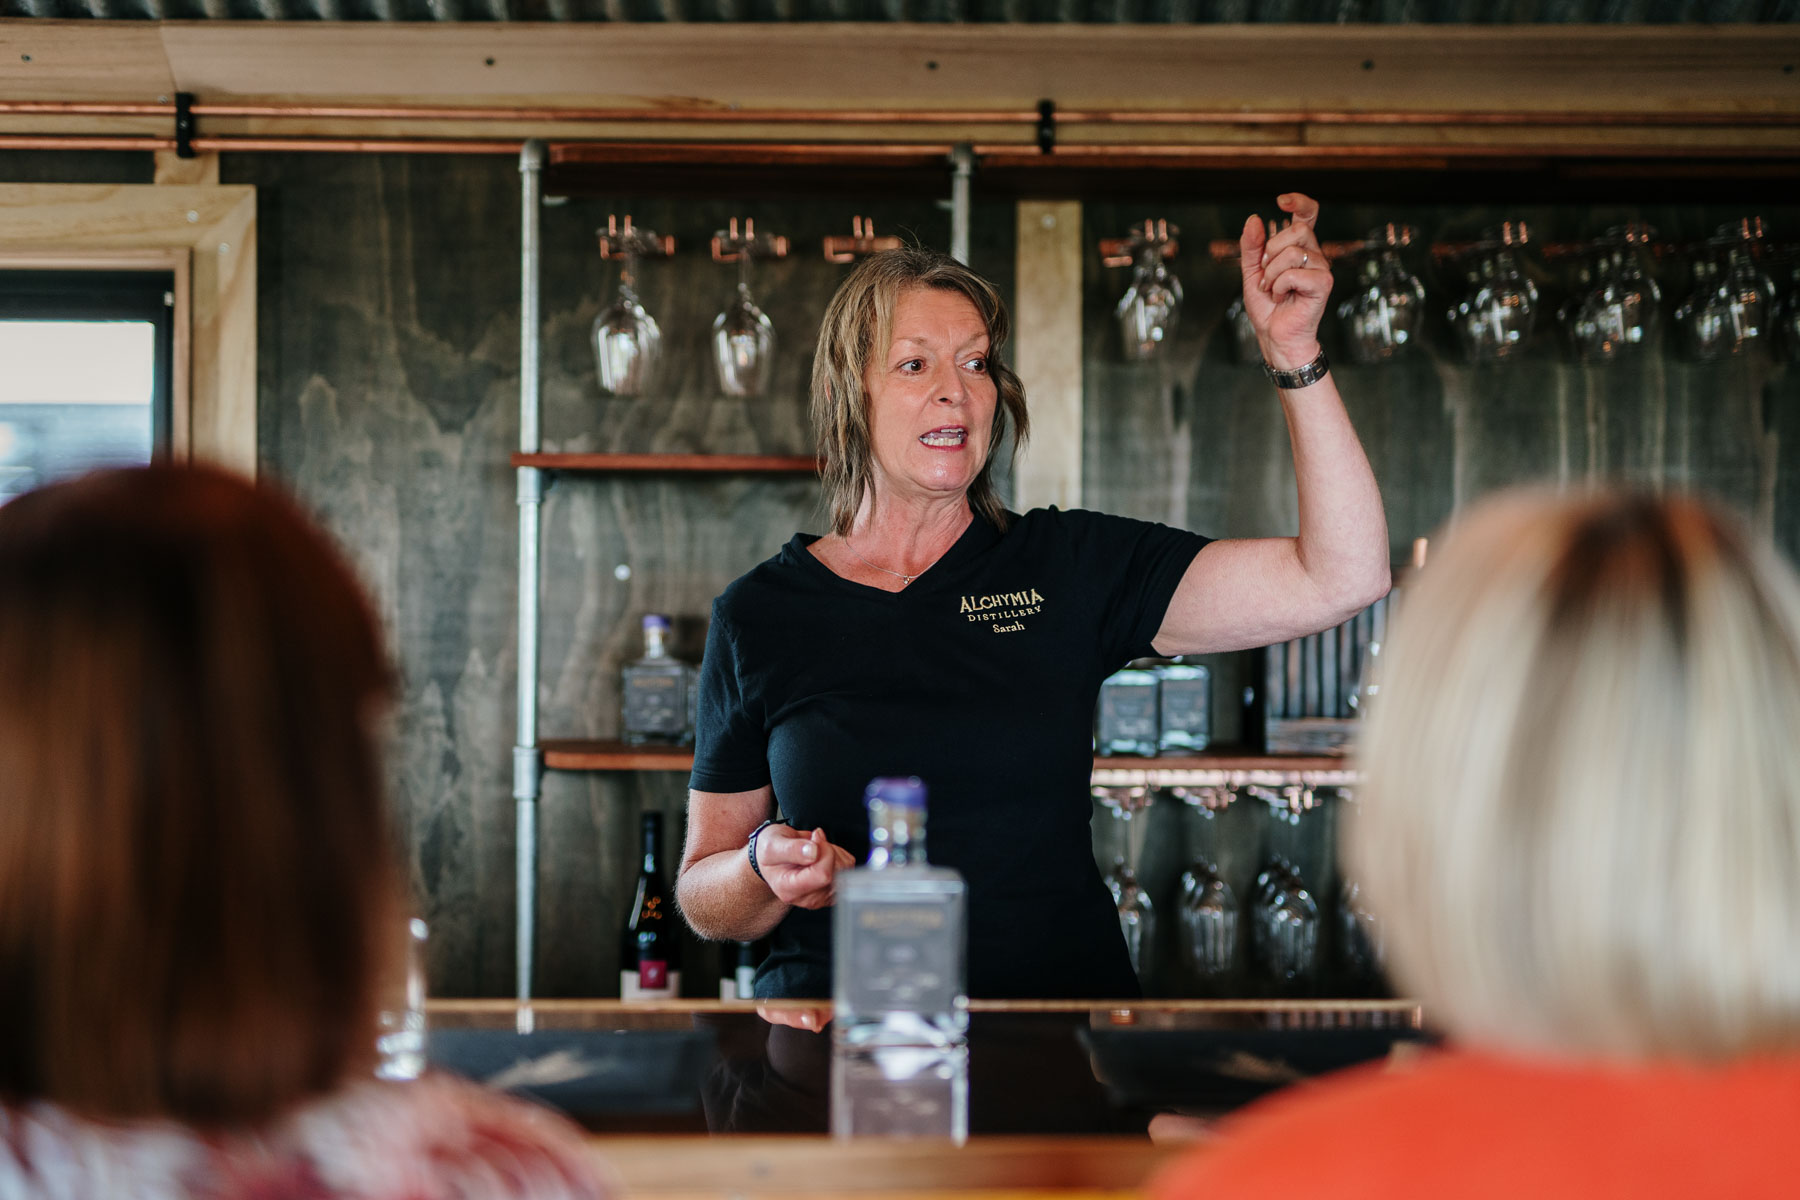 Discover North West Tasmania's local treasures with Coastline Tours. Our guided tours highlight the region's beauty and support local businesses, adding a meaningful dimension to your journey.